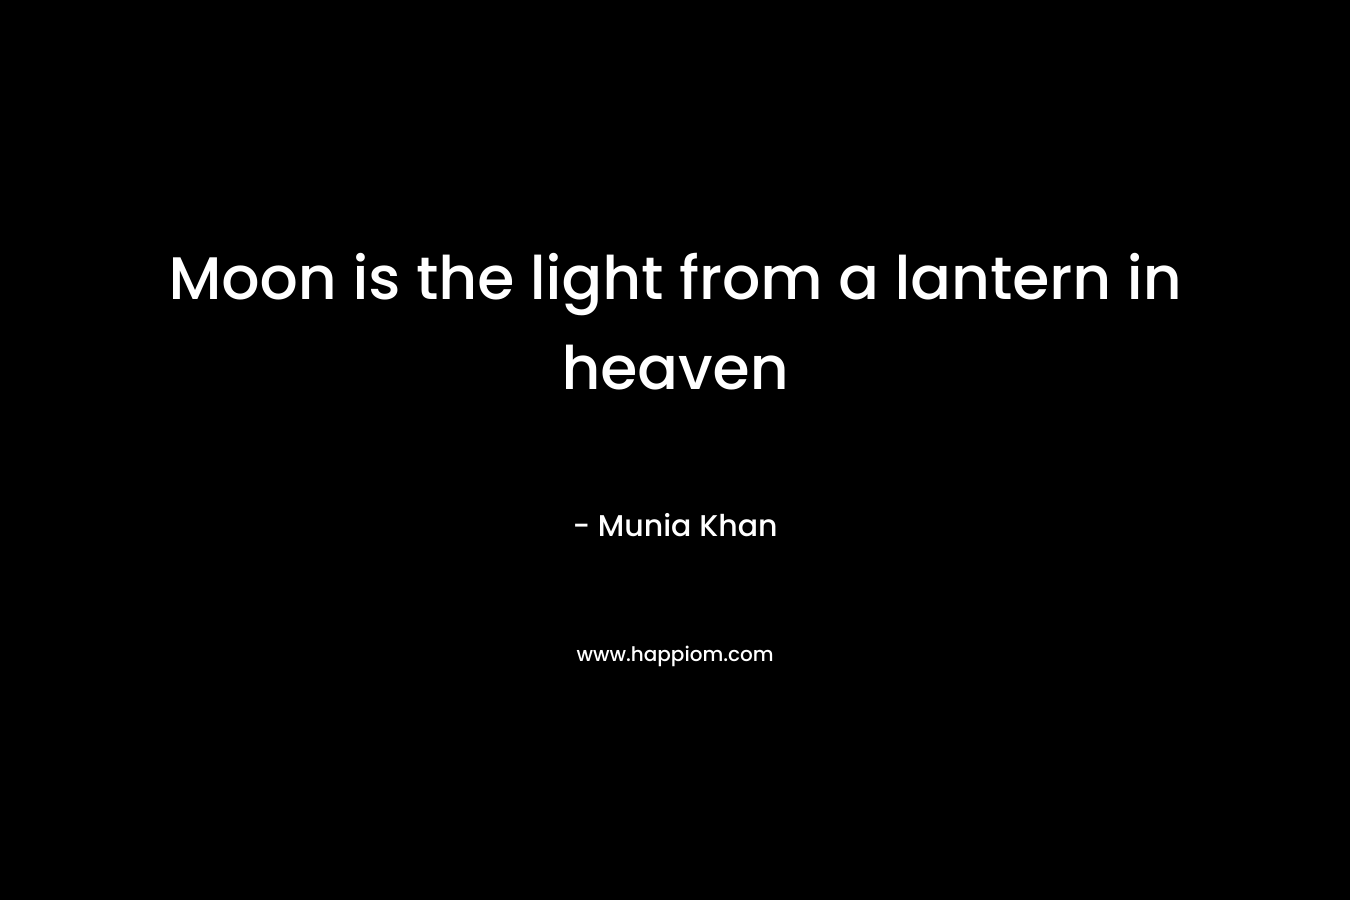 Moon is the light from a lantern in heaven